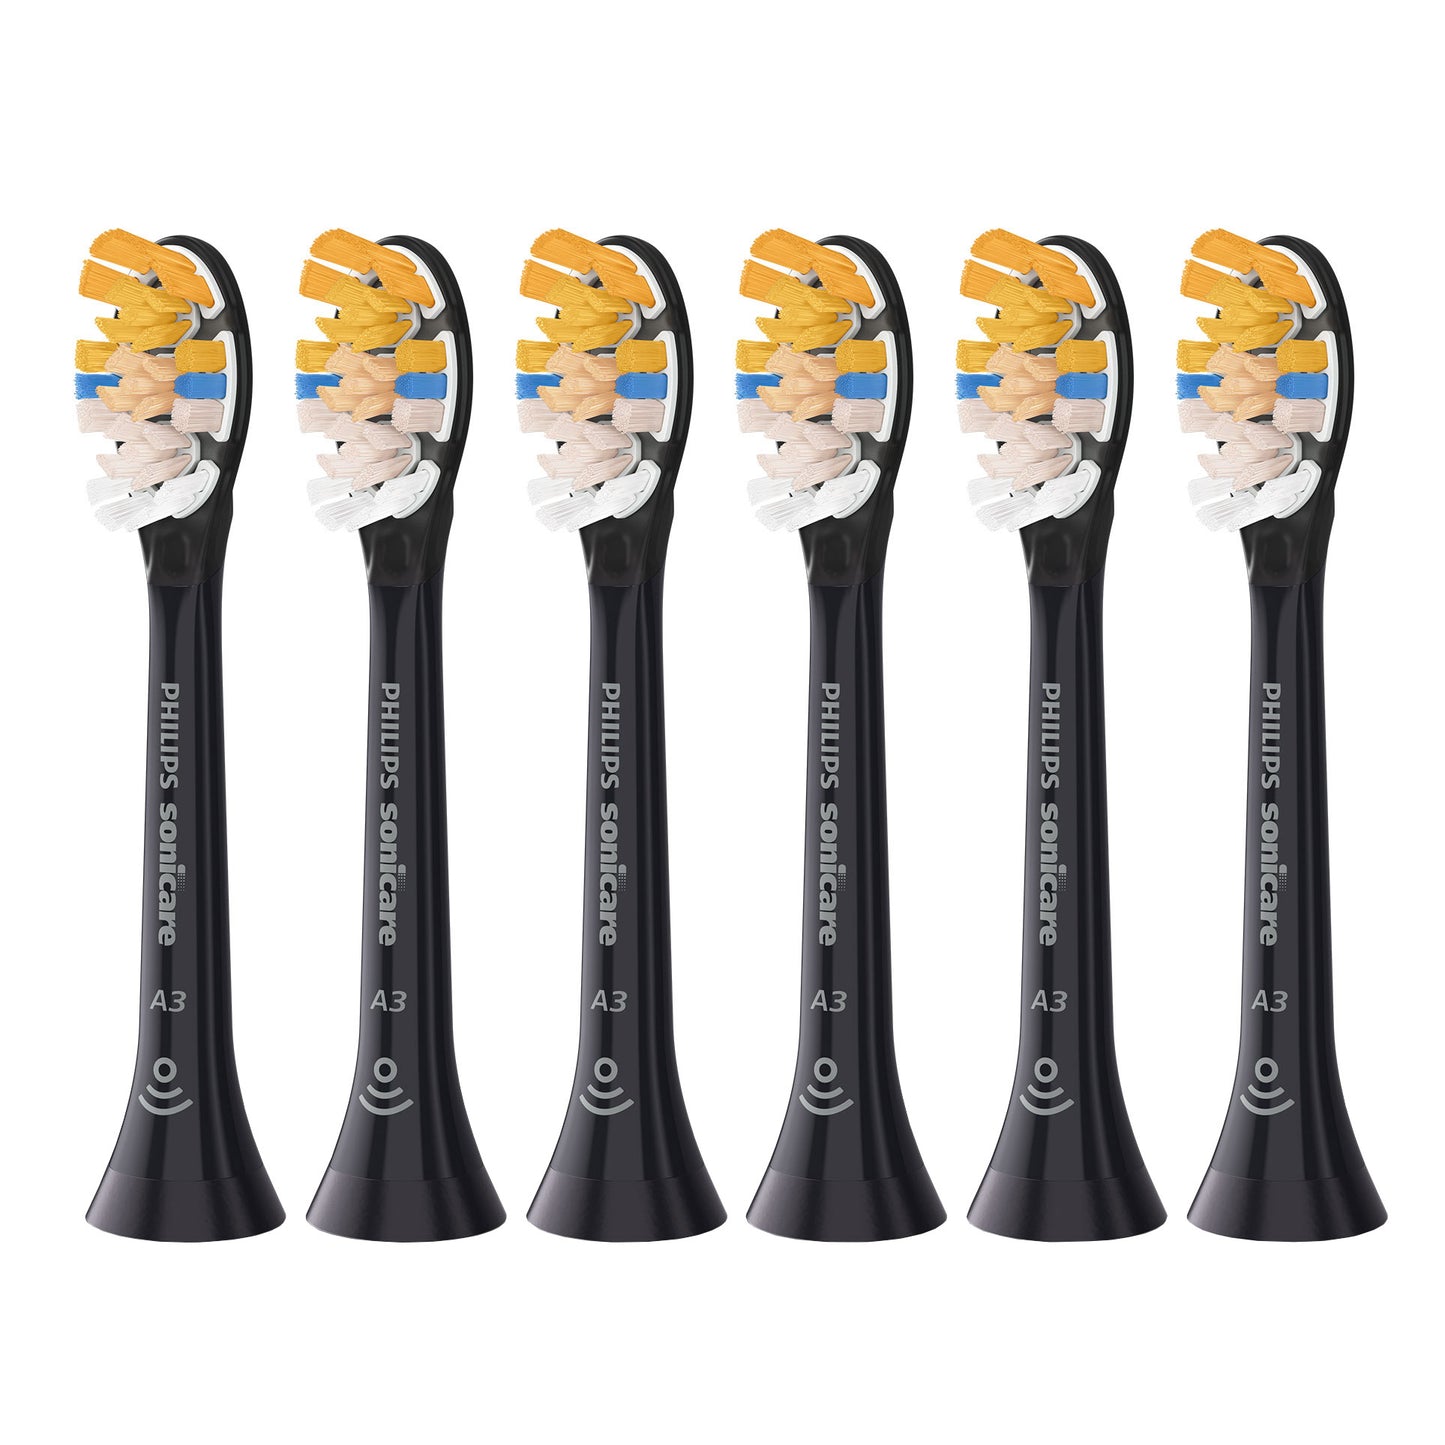 Philips Sonicare A3 All-In-One Brush Head, Pack of 6